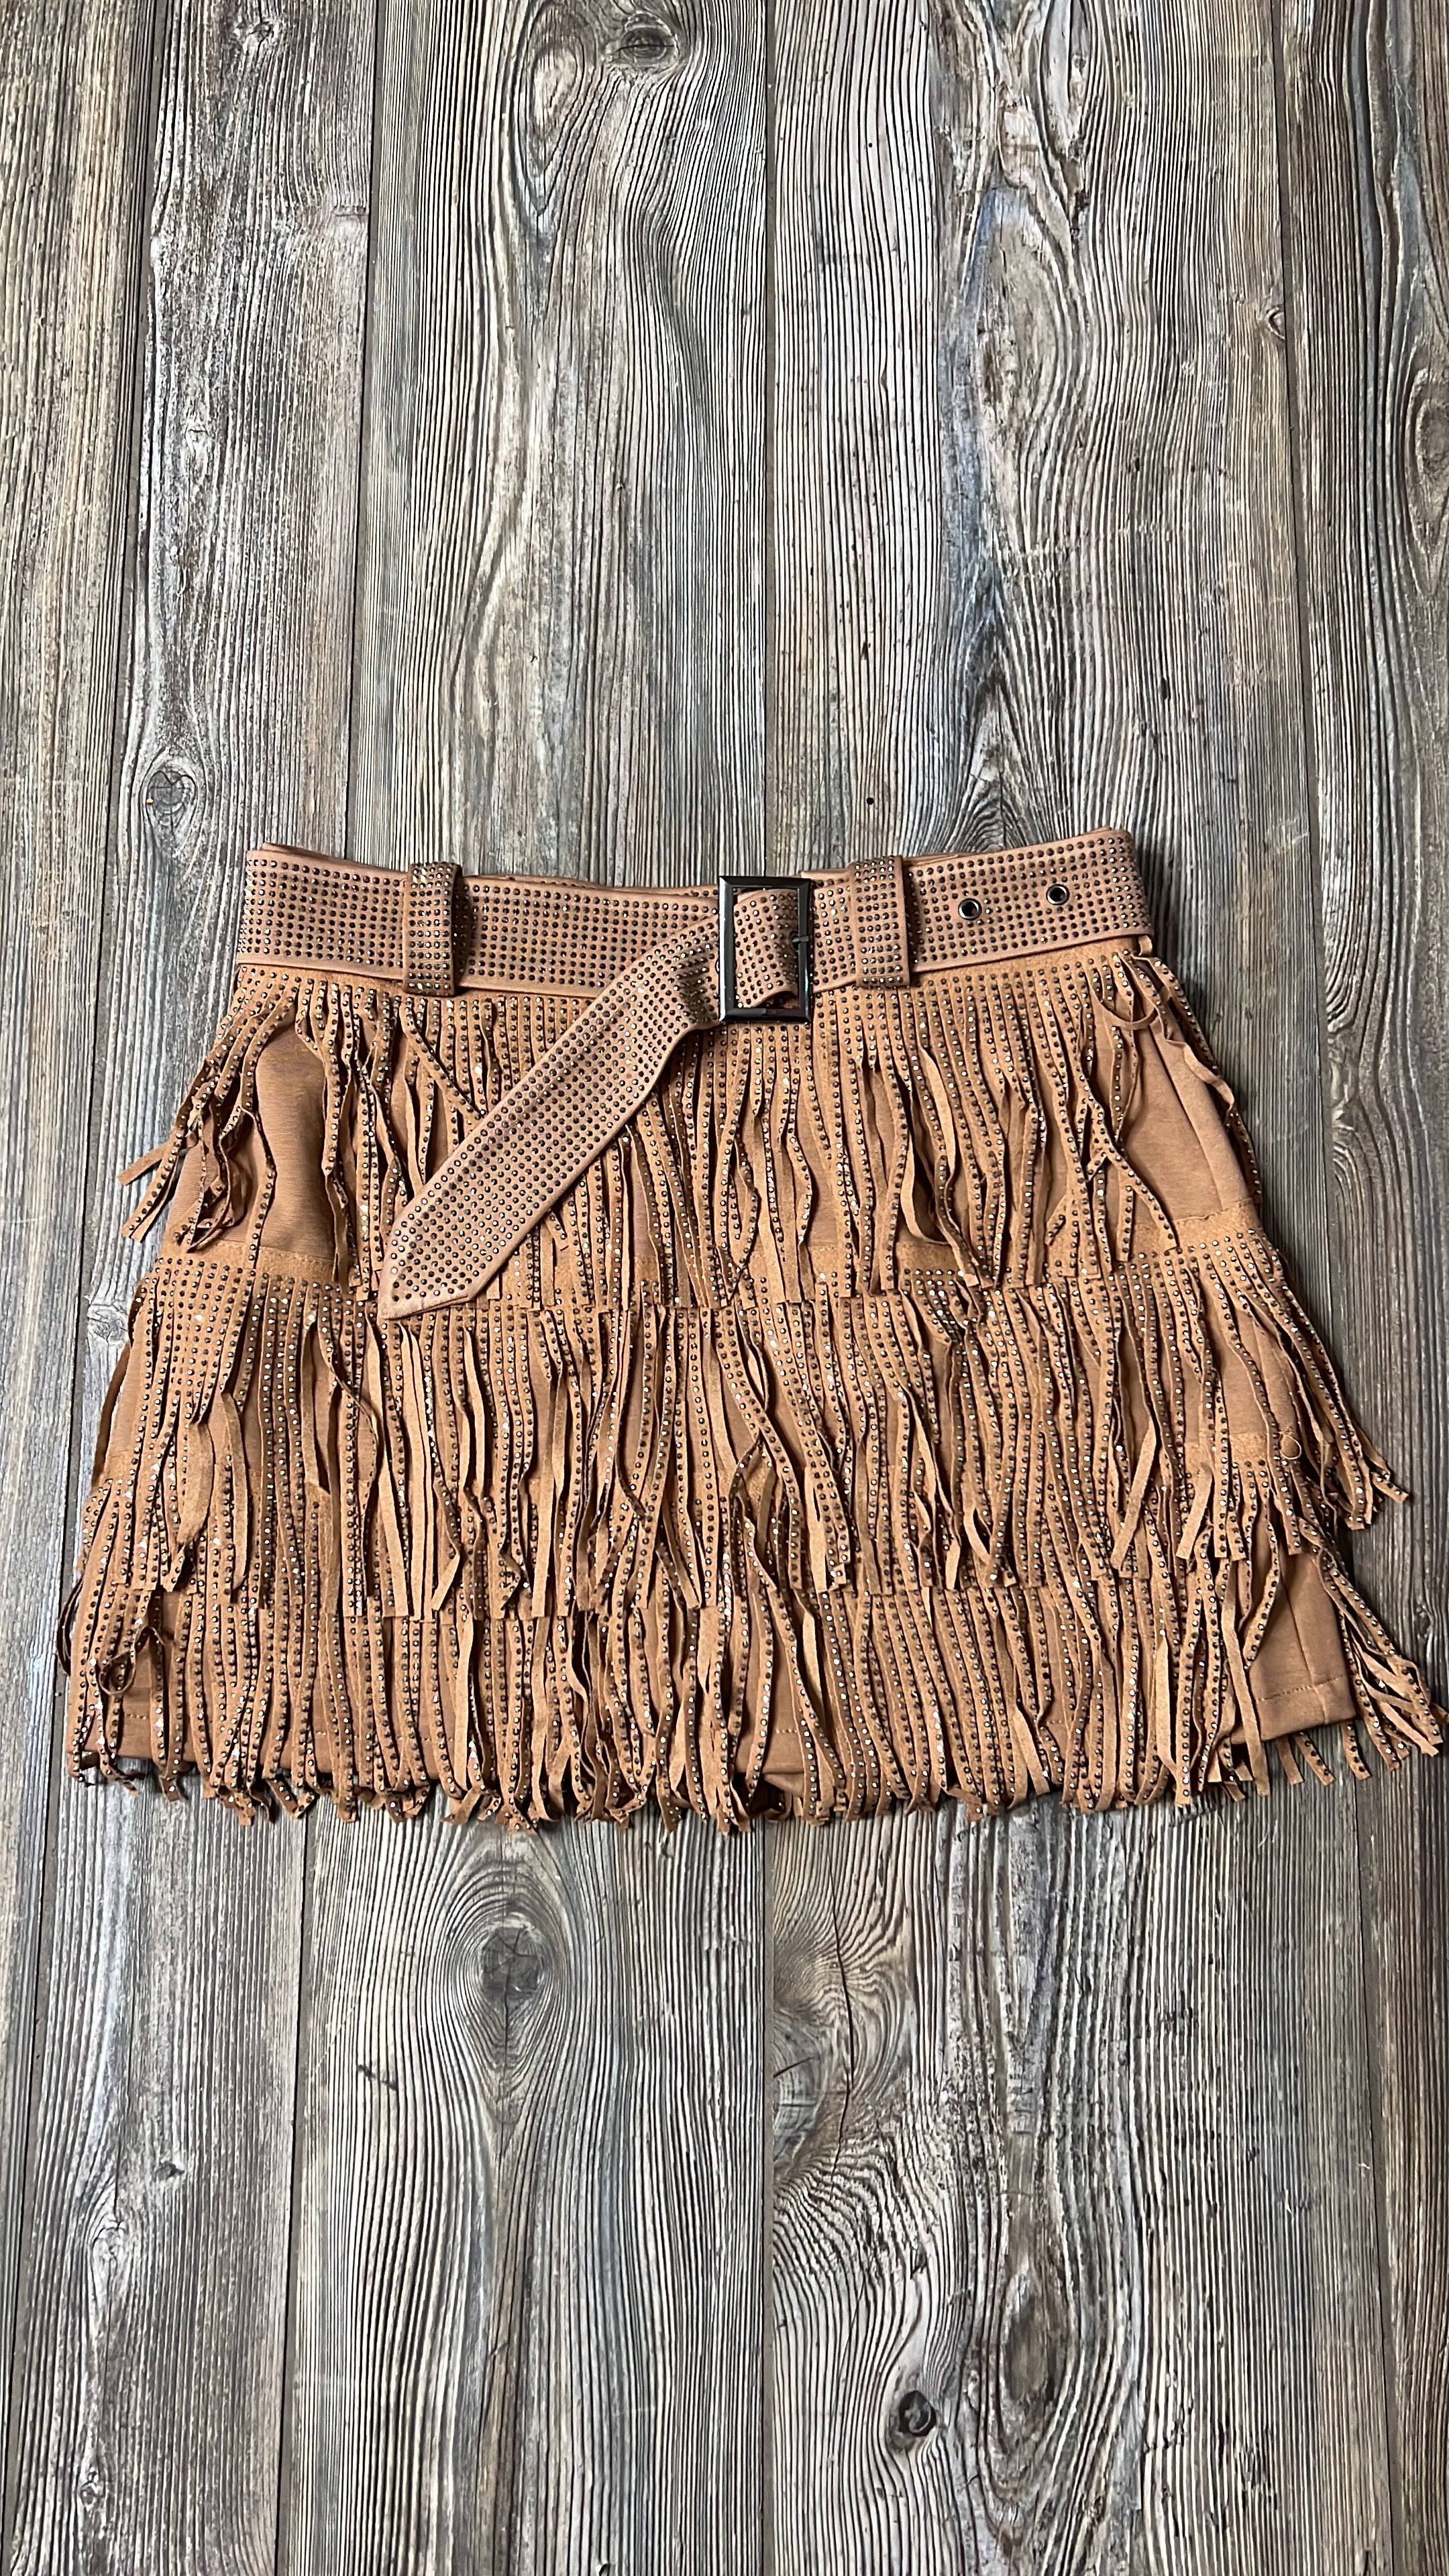 The Dolly skort- multiple colors!